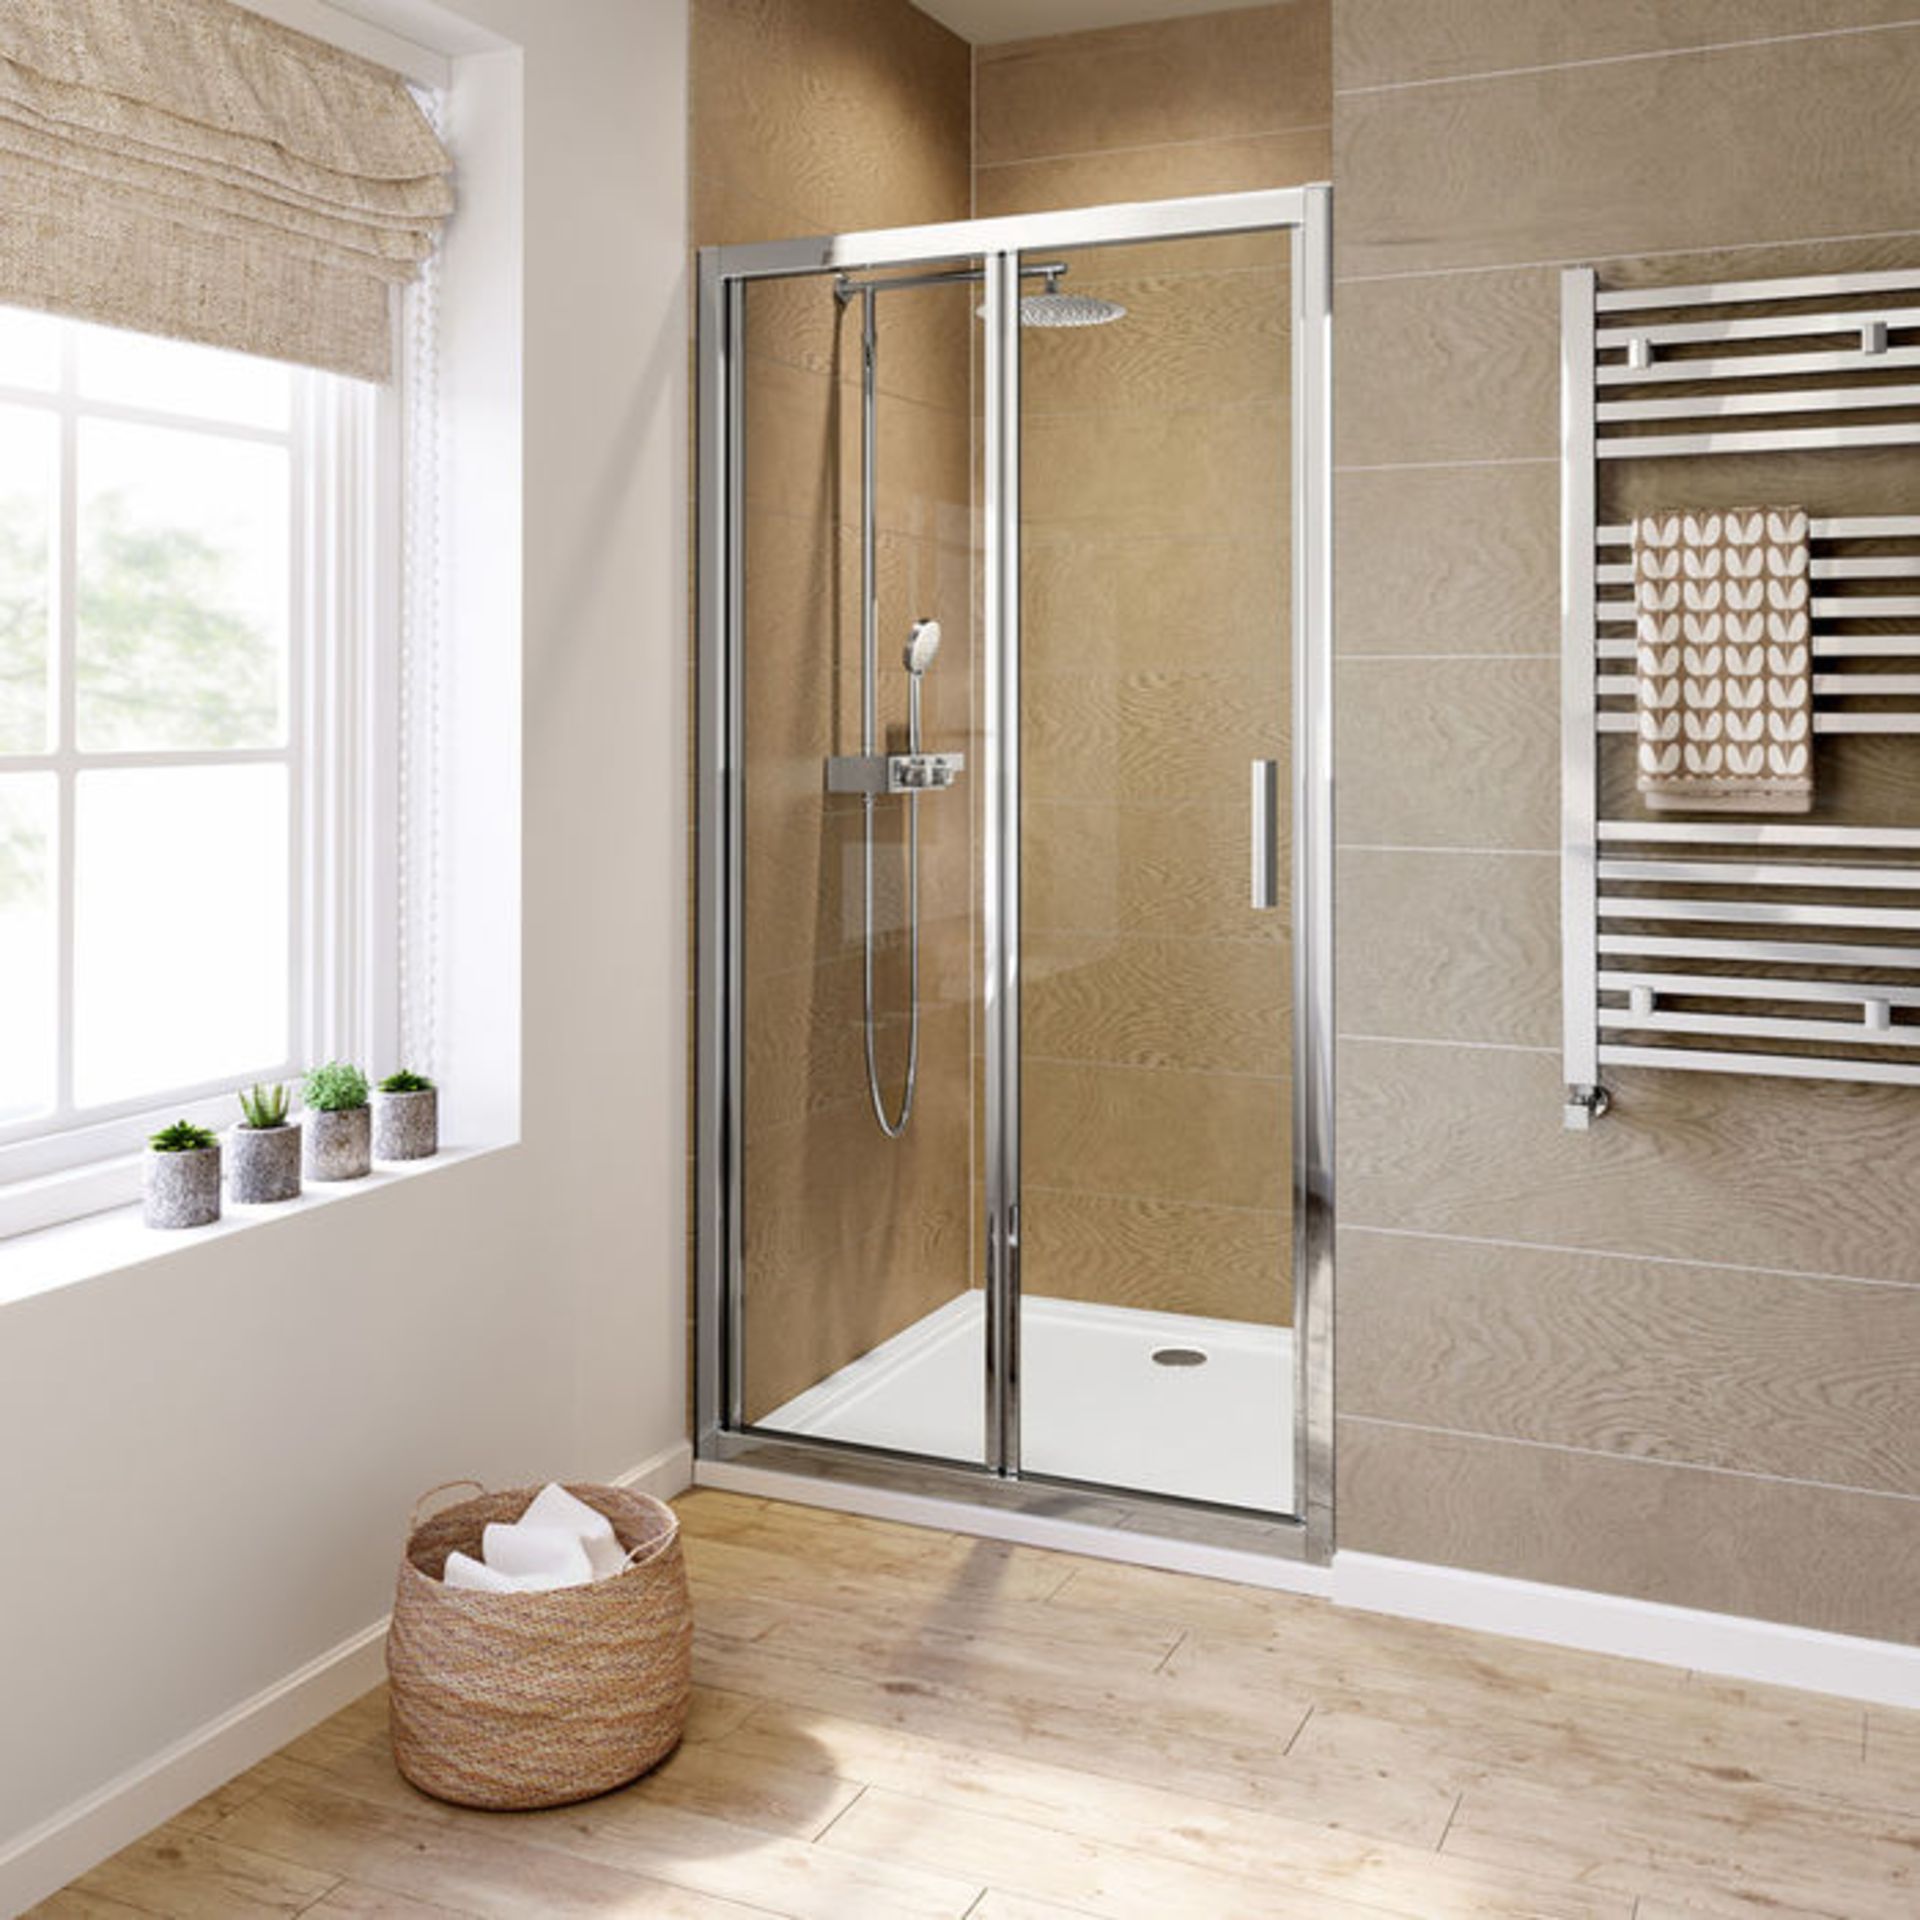 (XS307) 1000mm - 6mm - Elements EasyClean Bifold Shower Door. RRP £299.99. 6mm Safety Glass - - Image 3 of 6